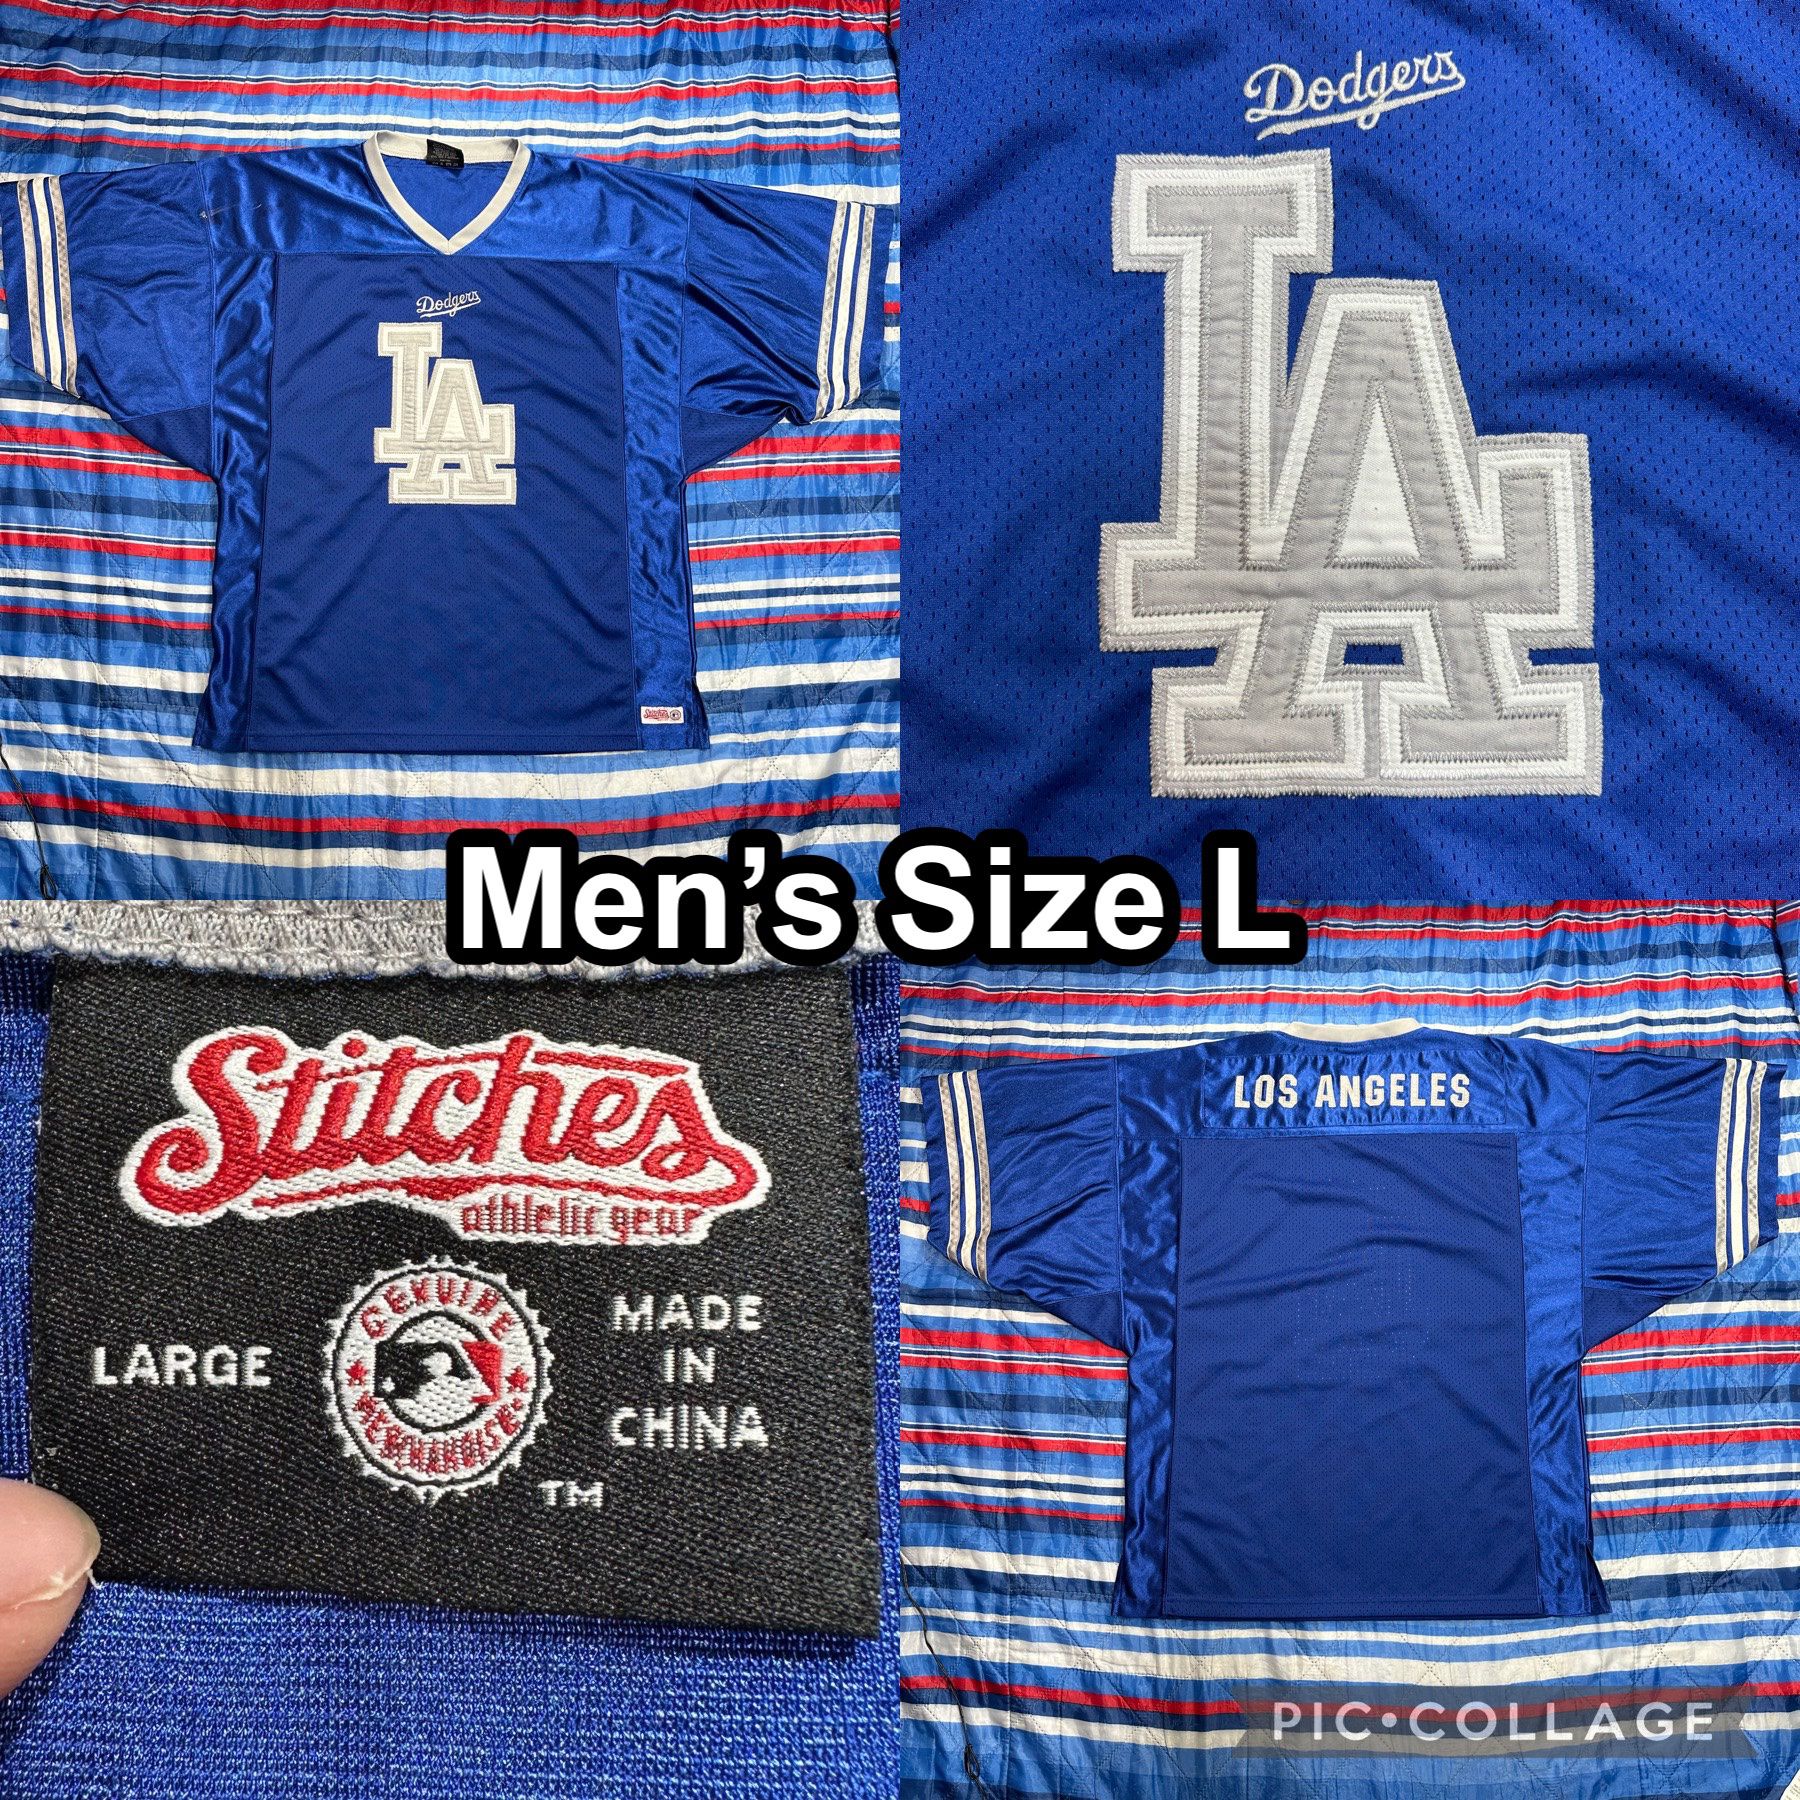 Dodgers All Star Game Gold Edition Jersey Size S M L XL XXL for Sale in Los  Angeles, CA - OfferUp